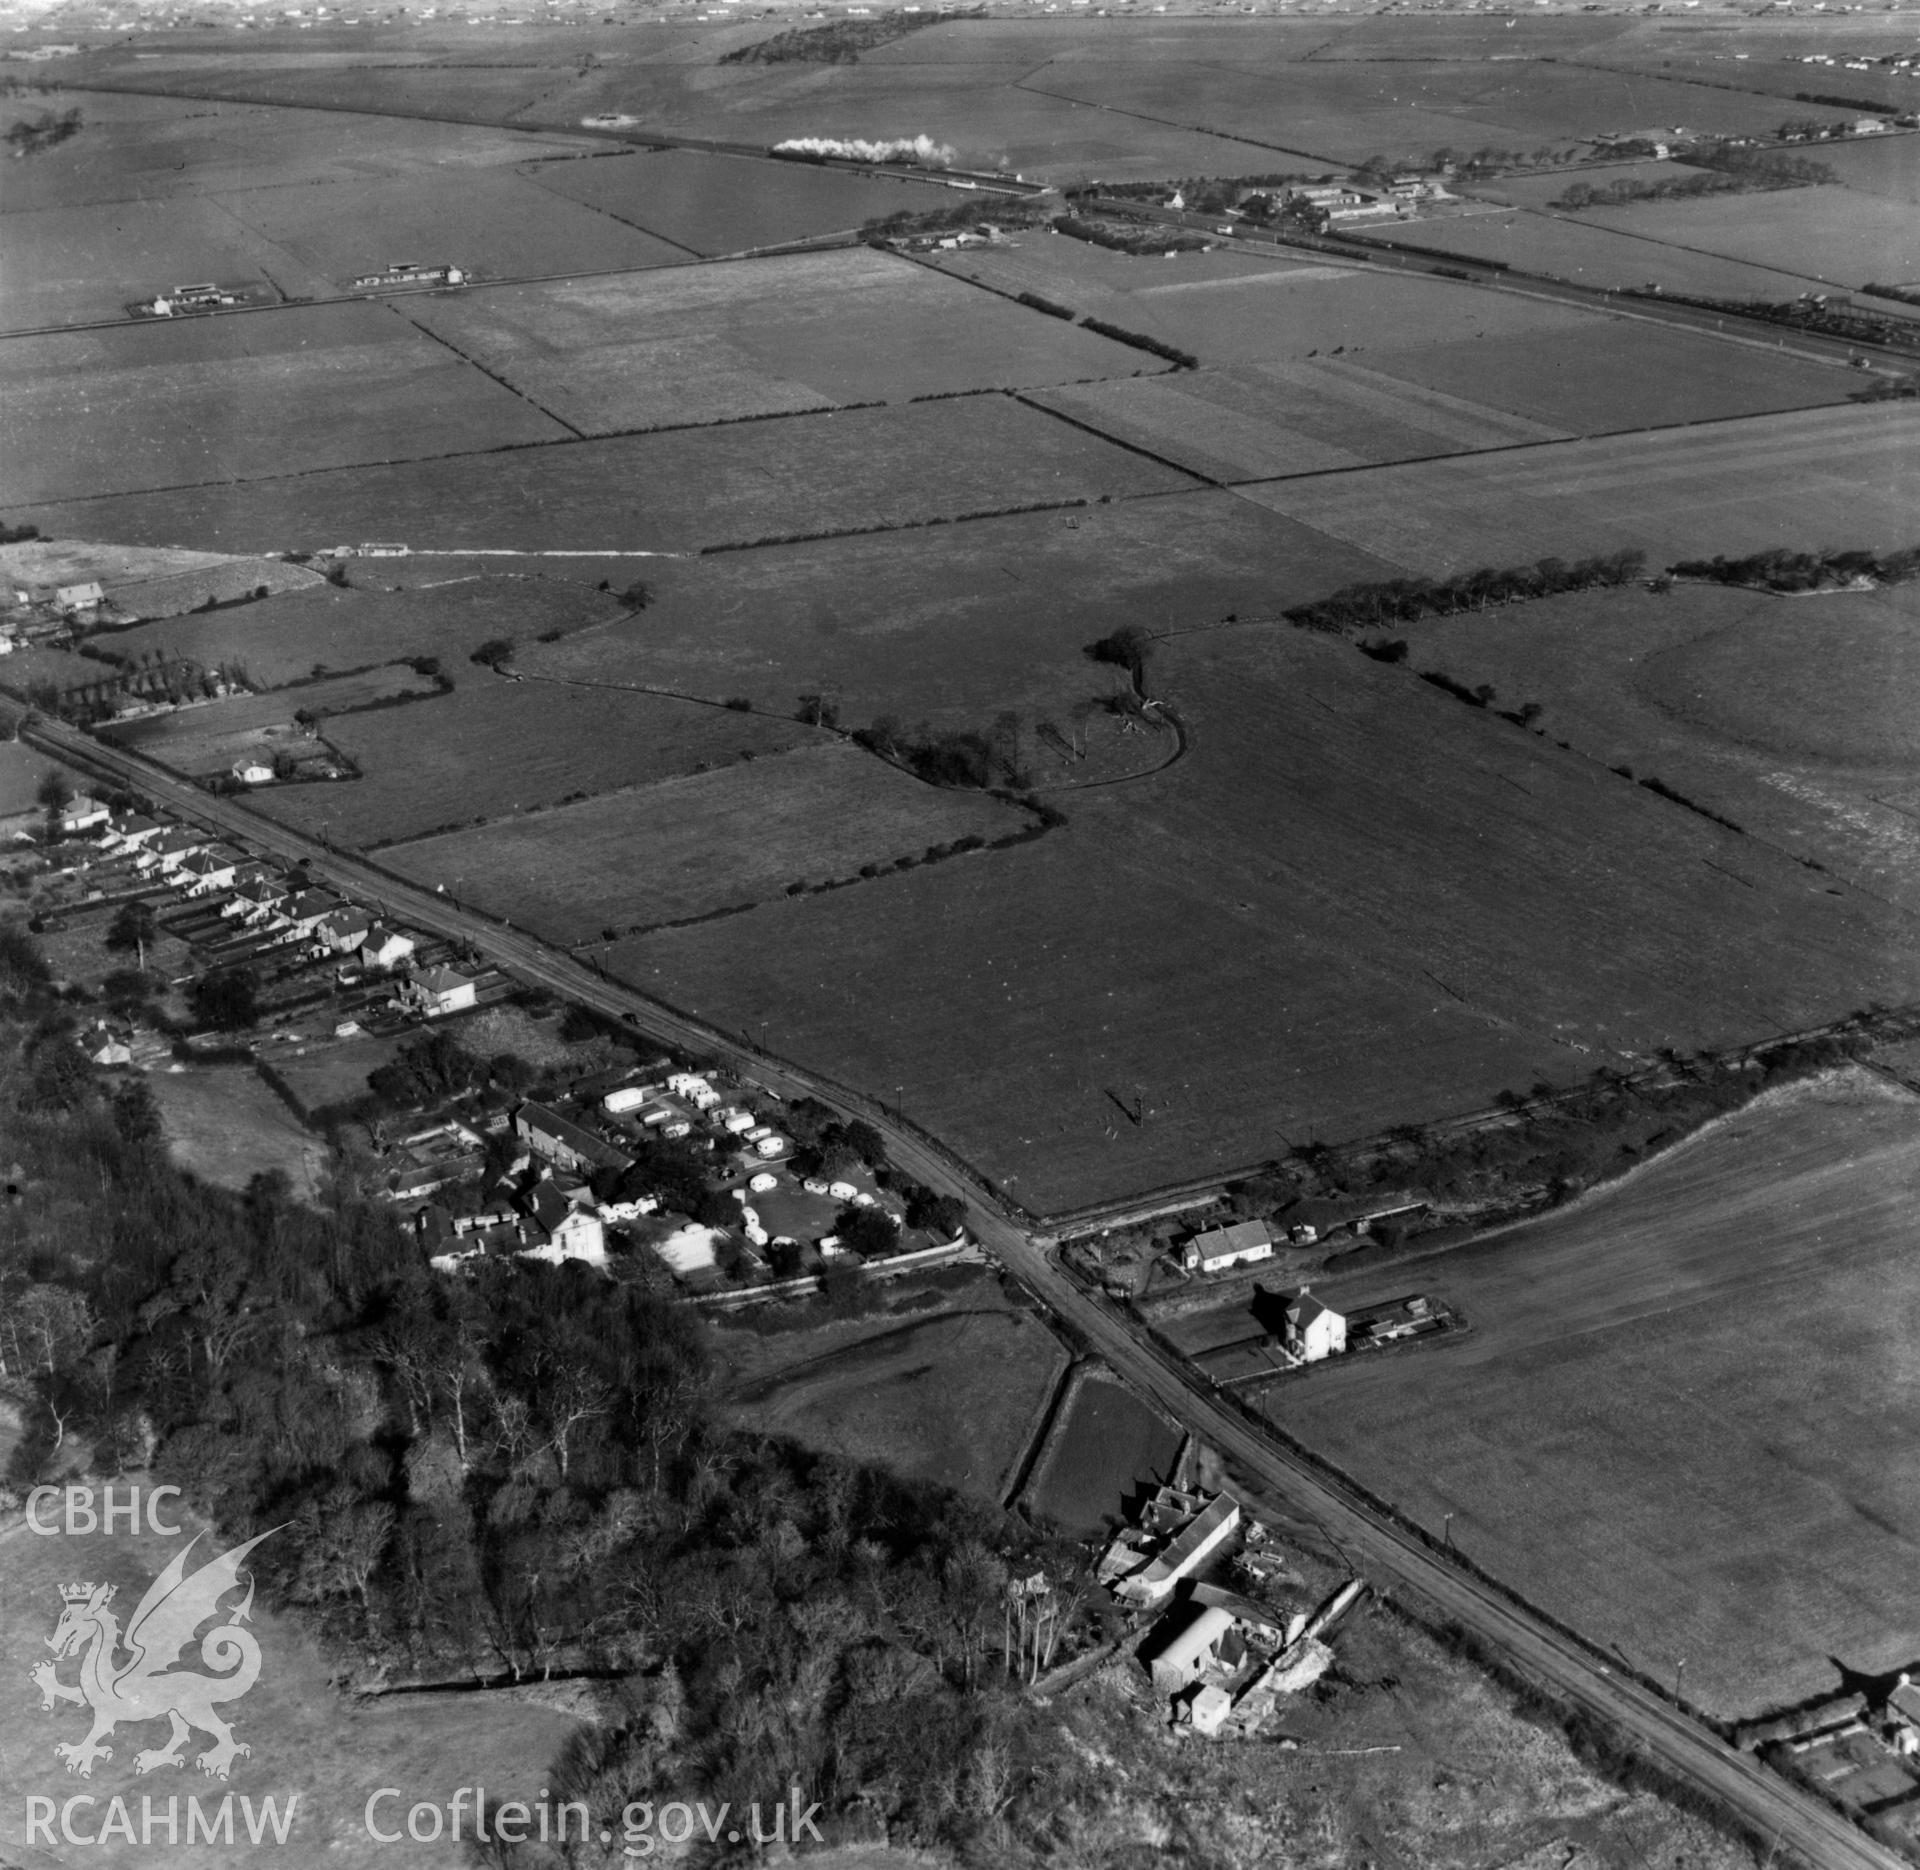 View of Tanlan and the Chester & Holyhead railway. Oblique aerial photograph, 5?" cut roll film.